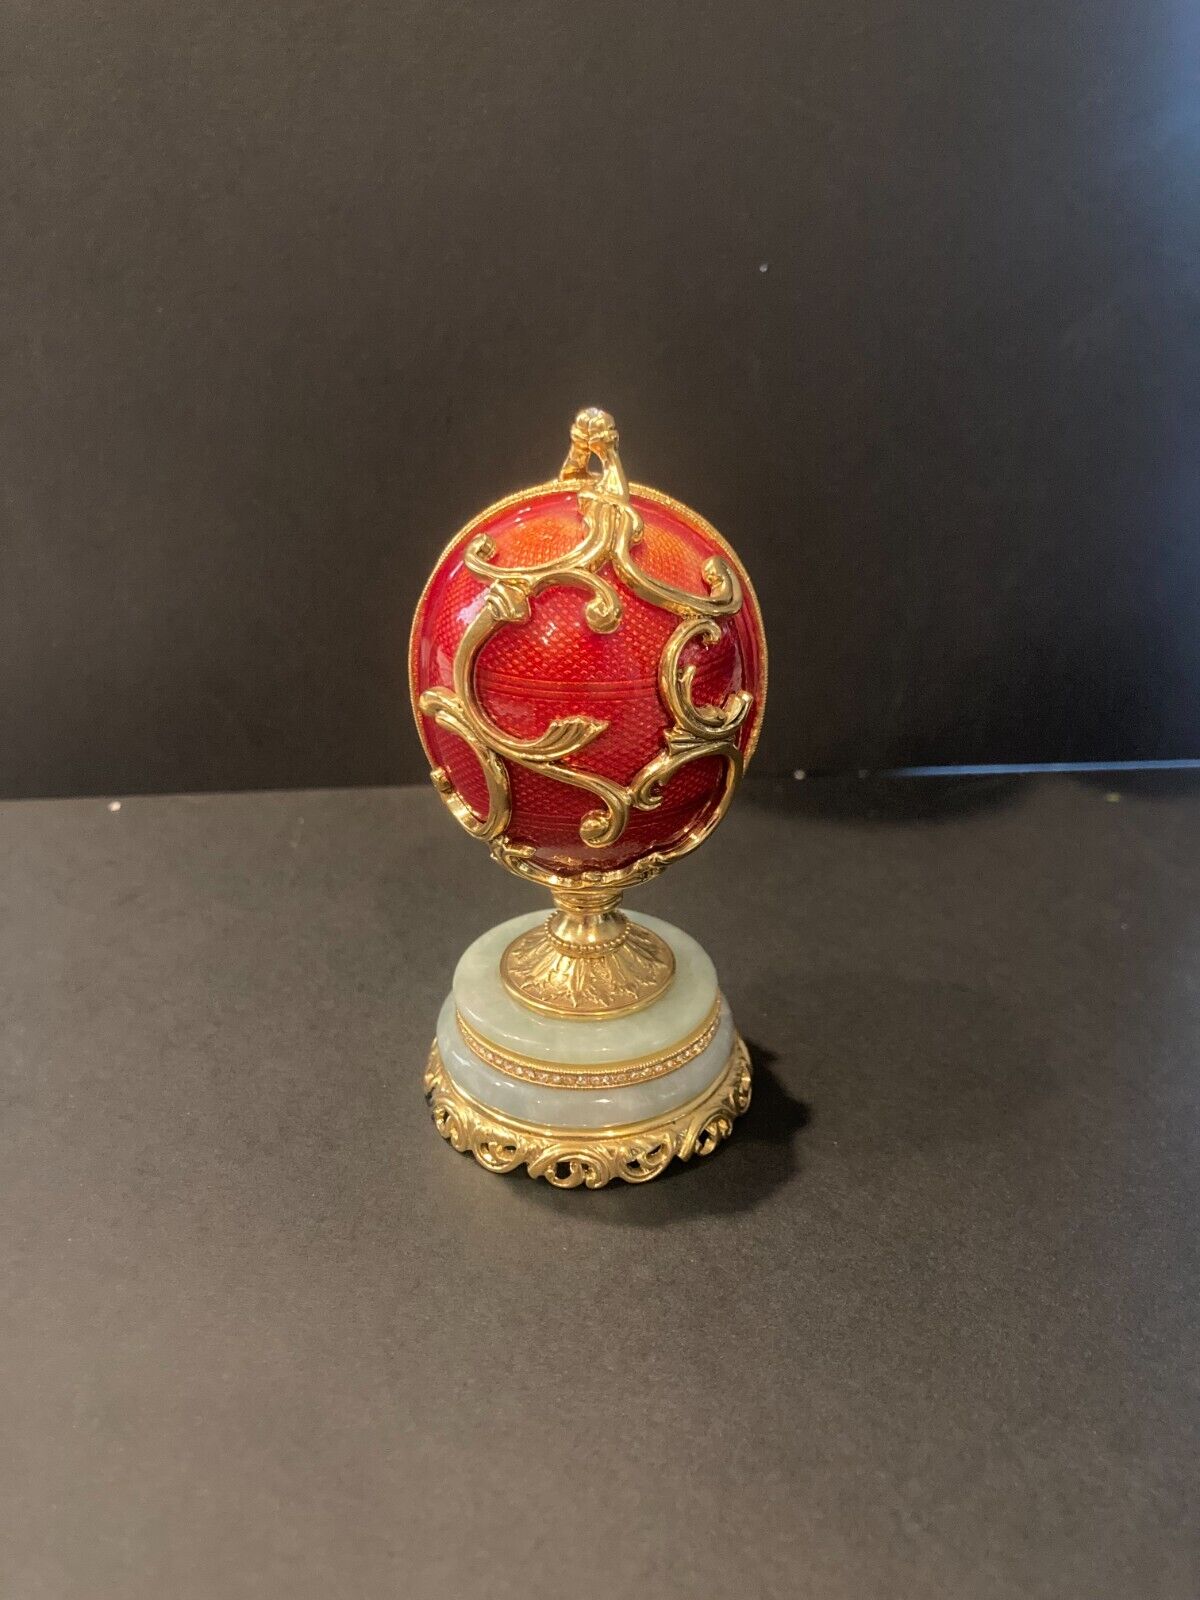 Faberge Imperial egg